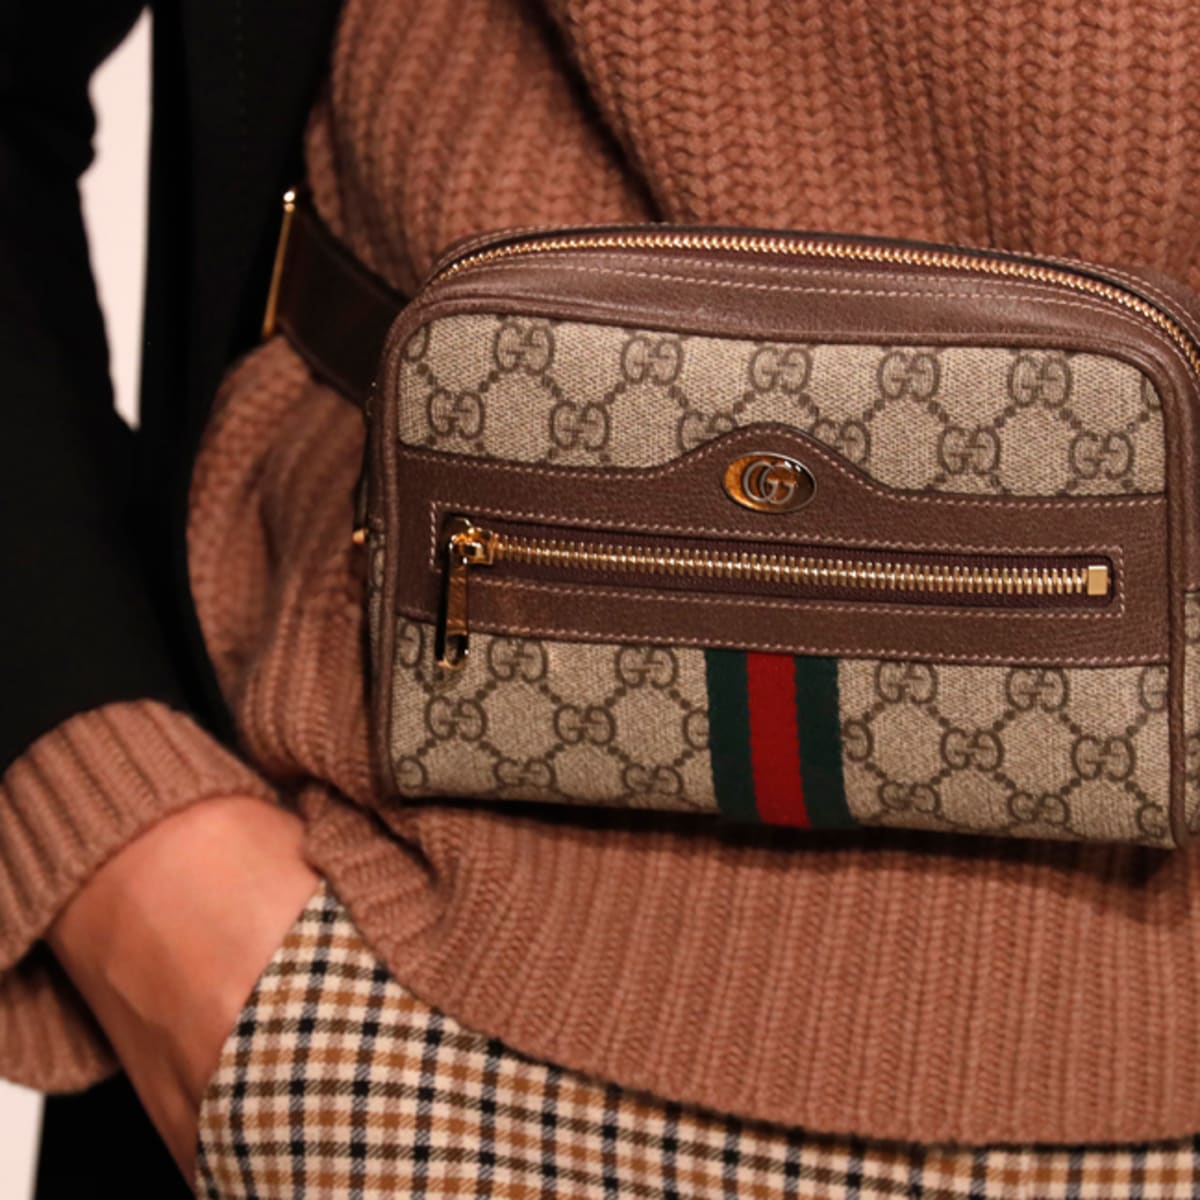 Gucci Is Back on Top as the World's Hottest Fashion Brand